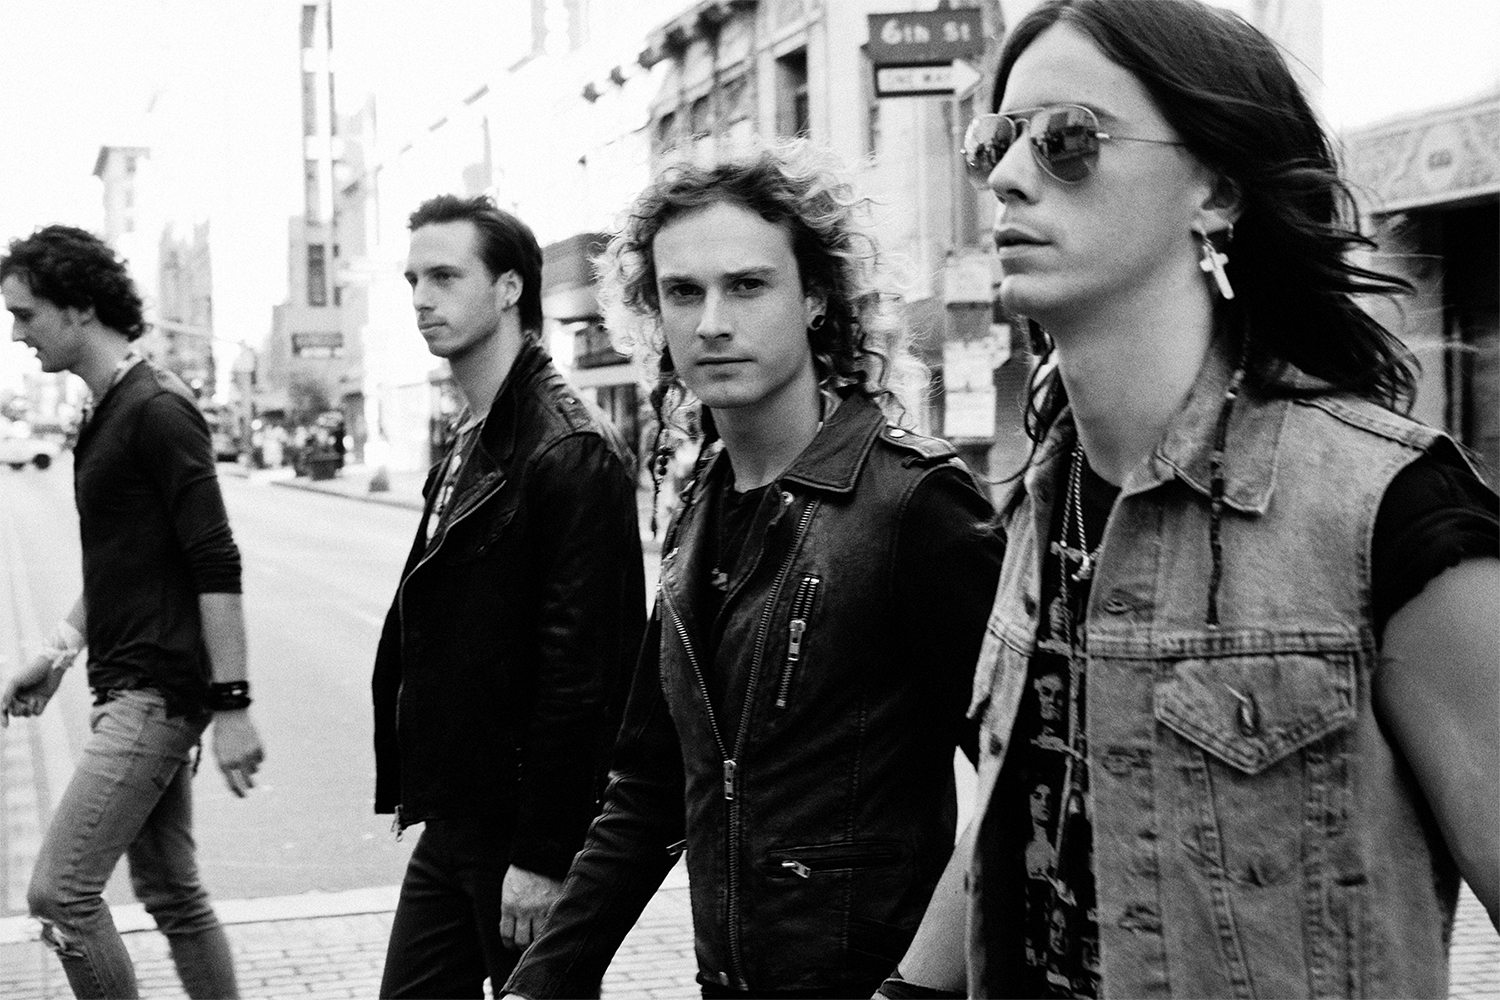 Heaven’s Basement, Glamour Of The Kill en The Dirty Youth naar Amsterdam